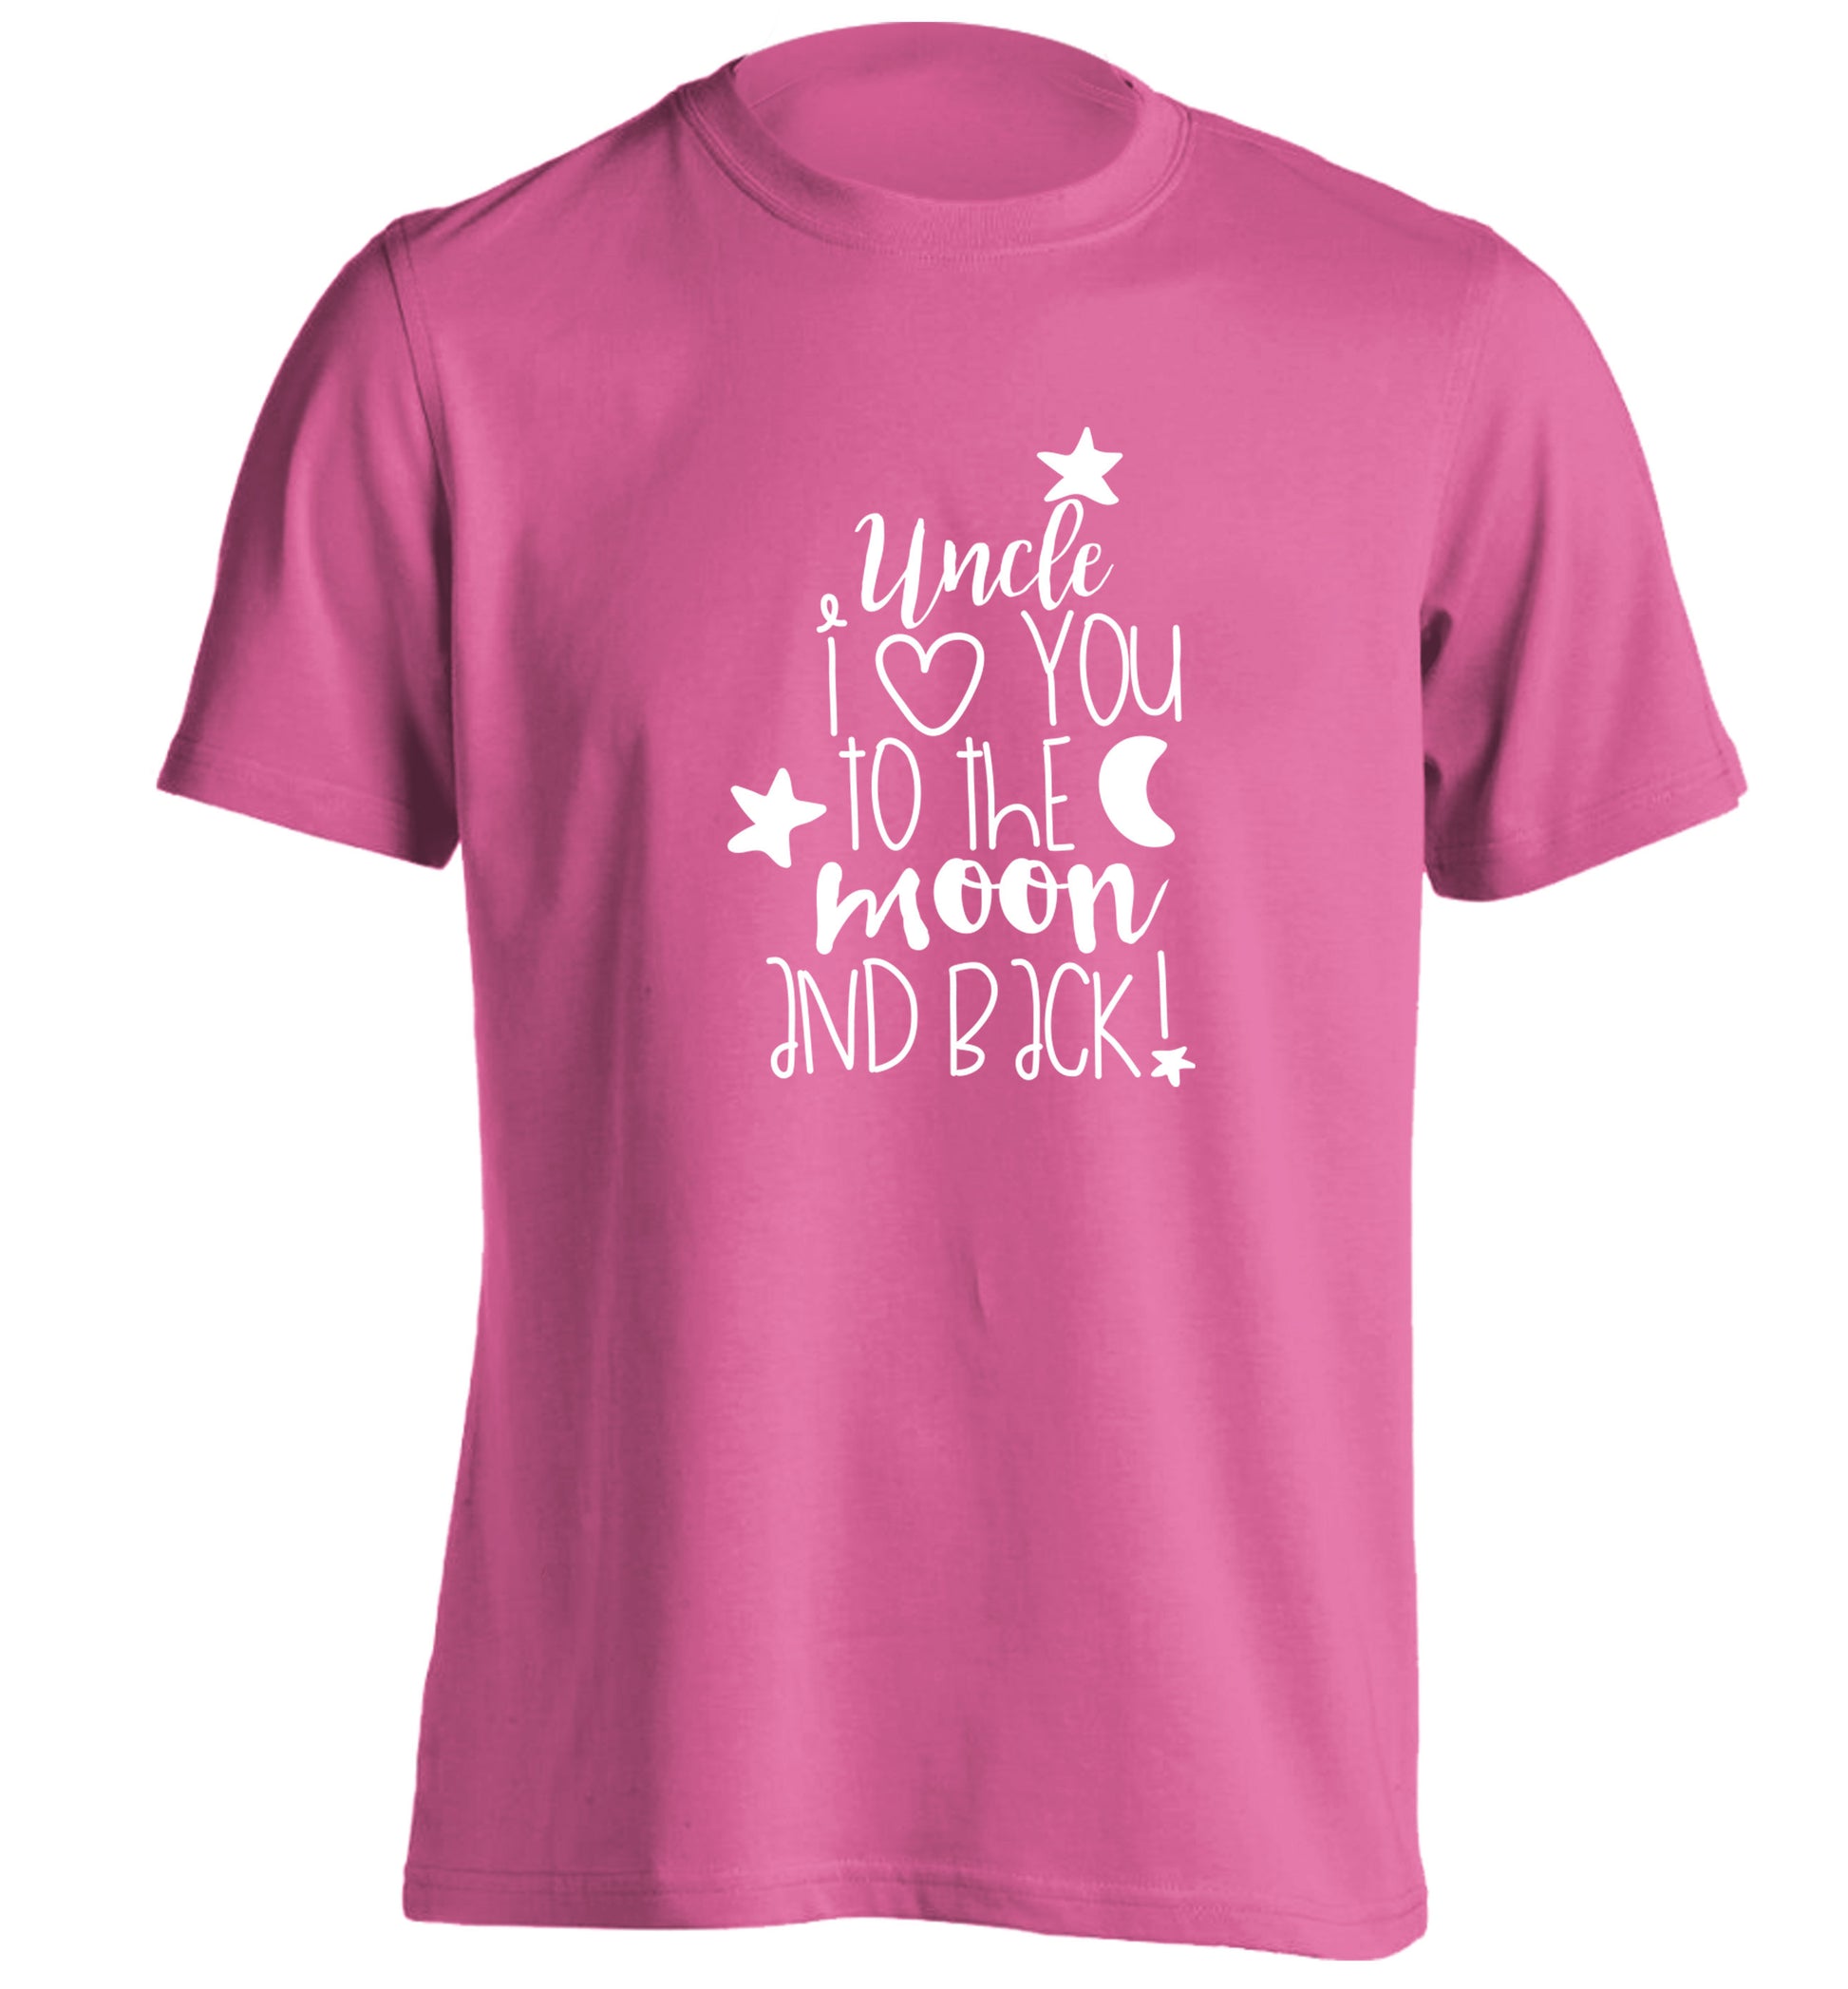 Uncle I love you to the moon and back adults unisex pink Tshirt 2XL